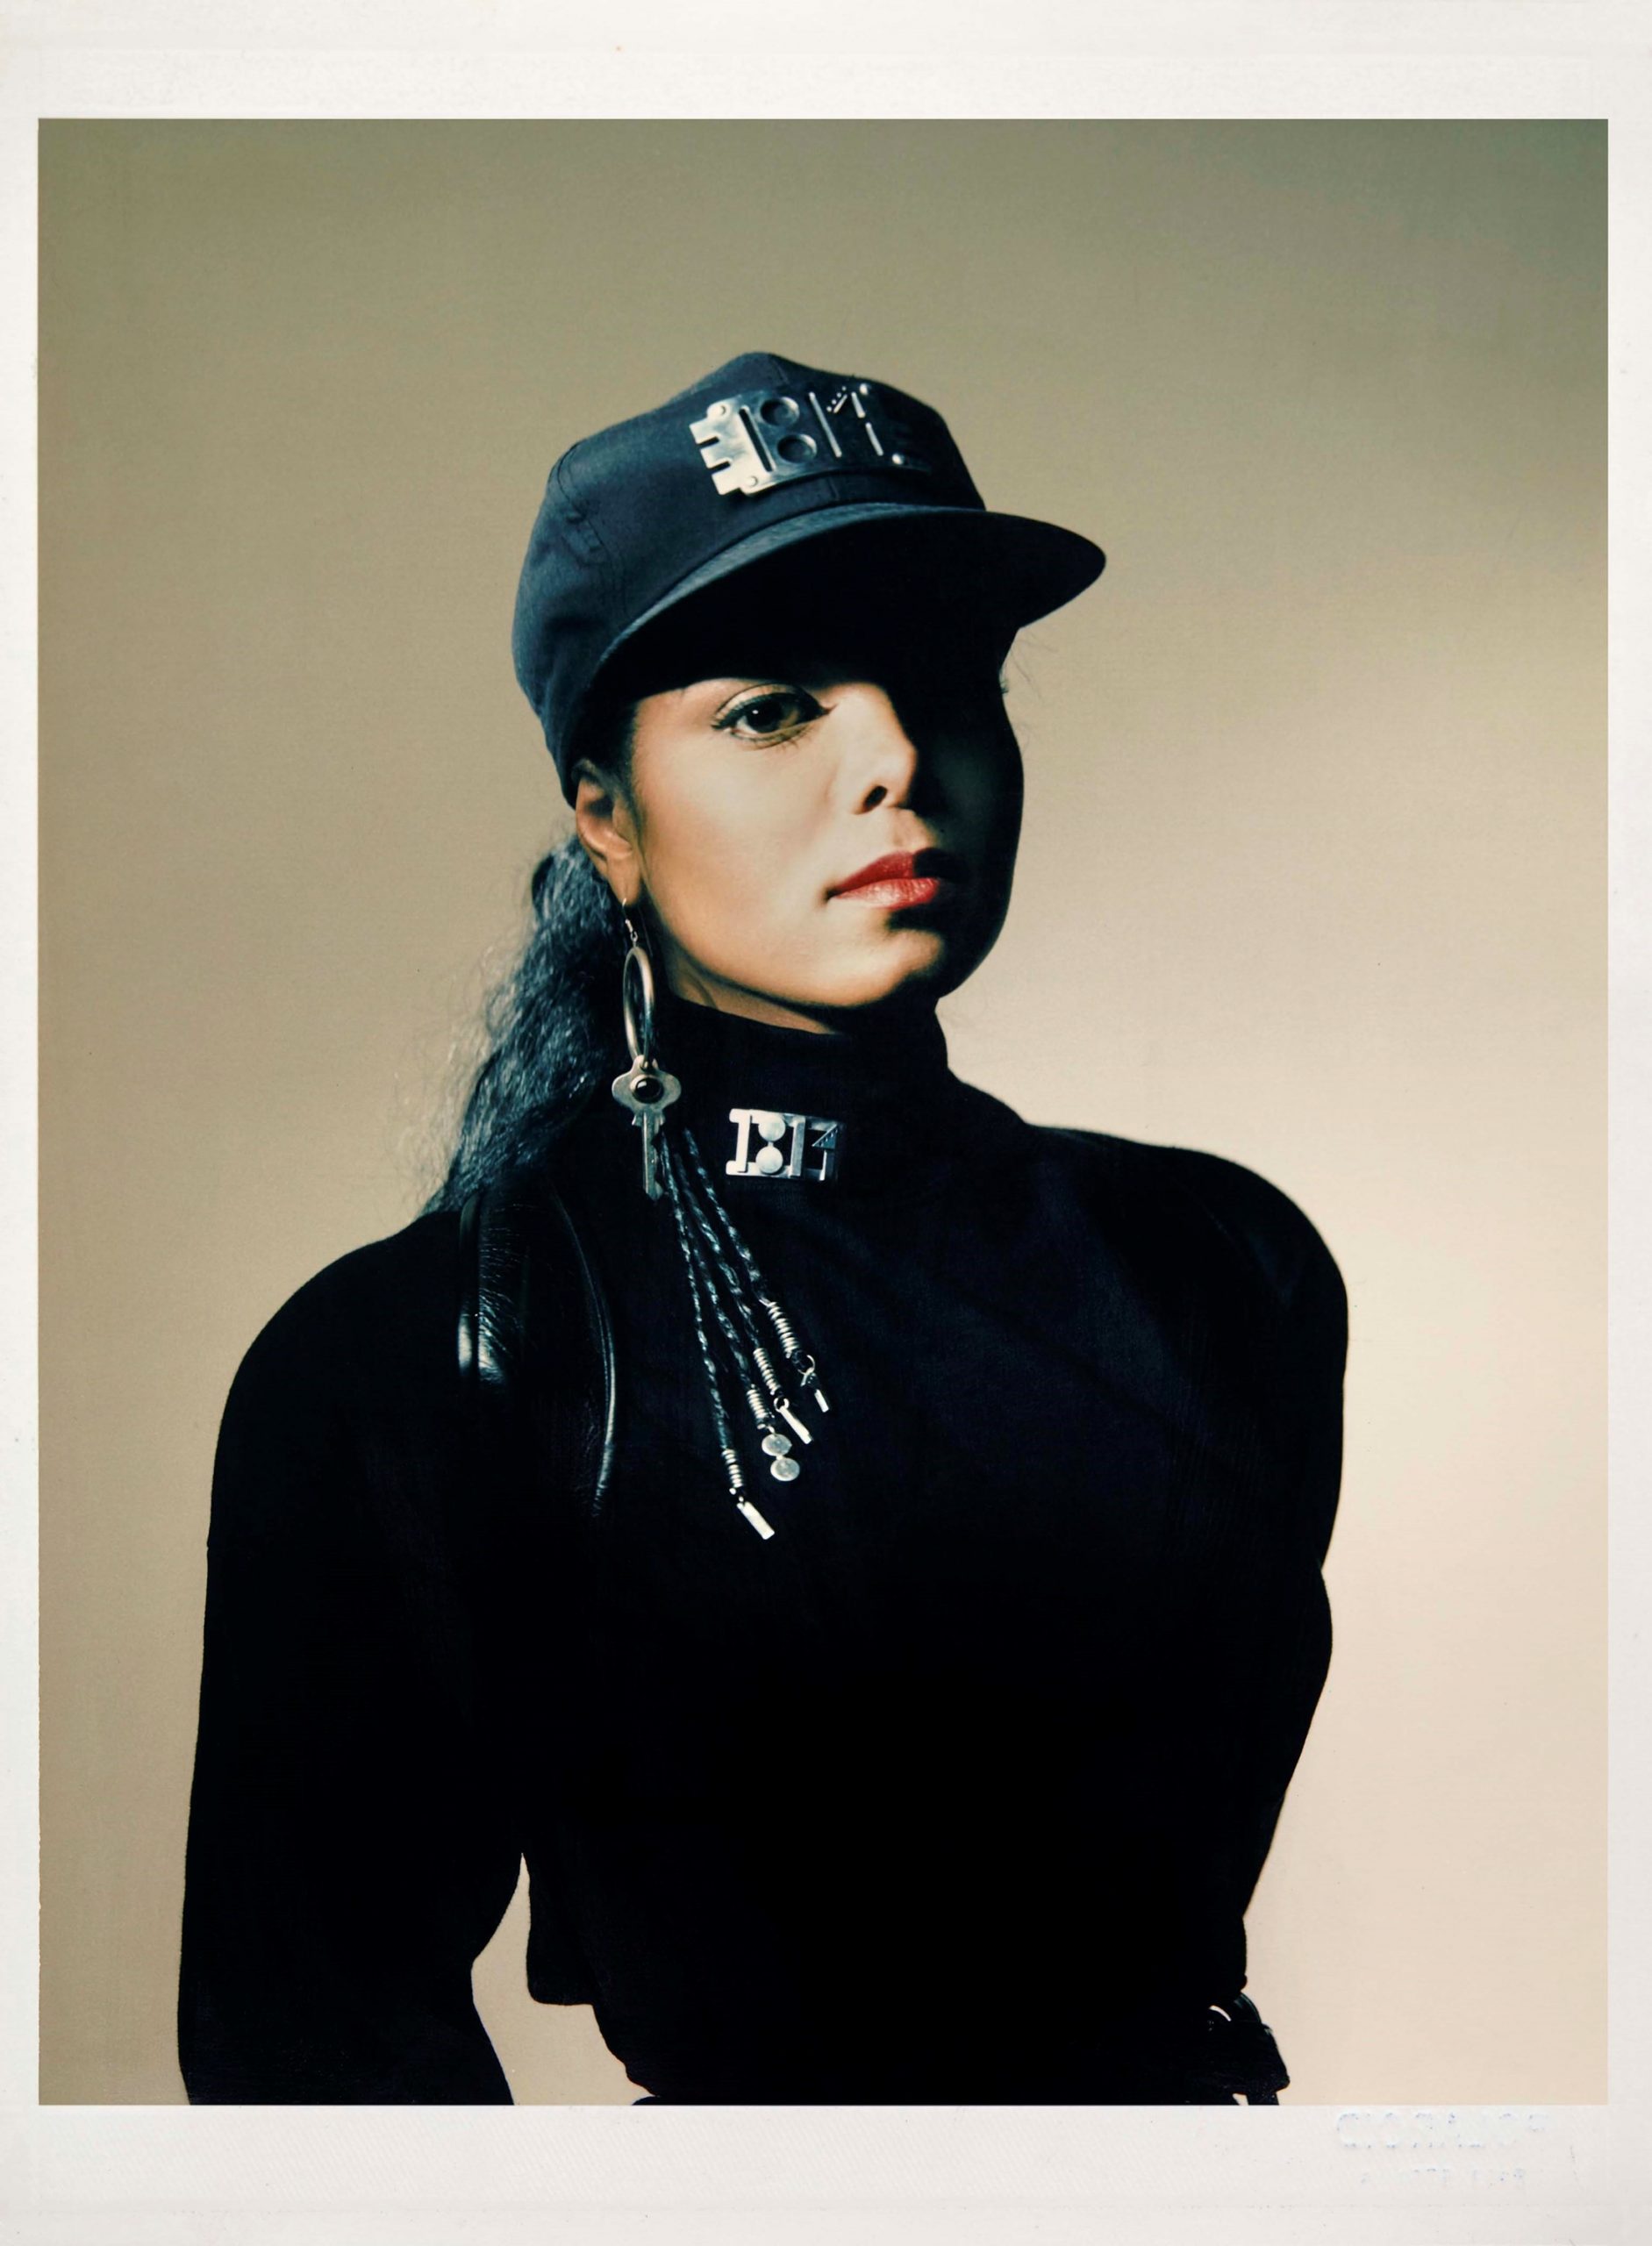 janet-jacksons-classic-rhythm-nation-1814-added-to-national-recording-registry